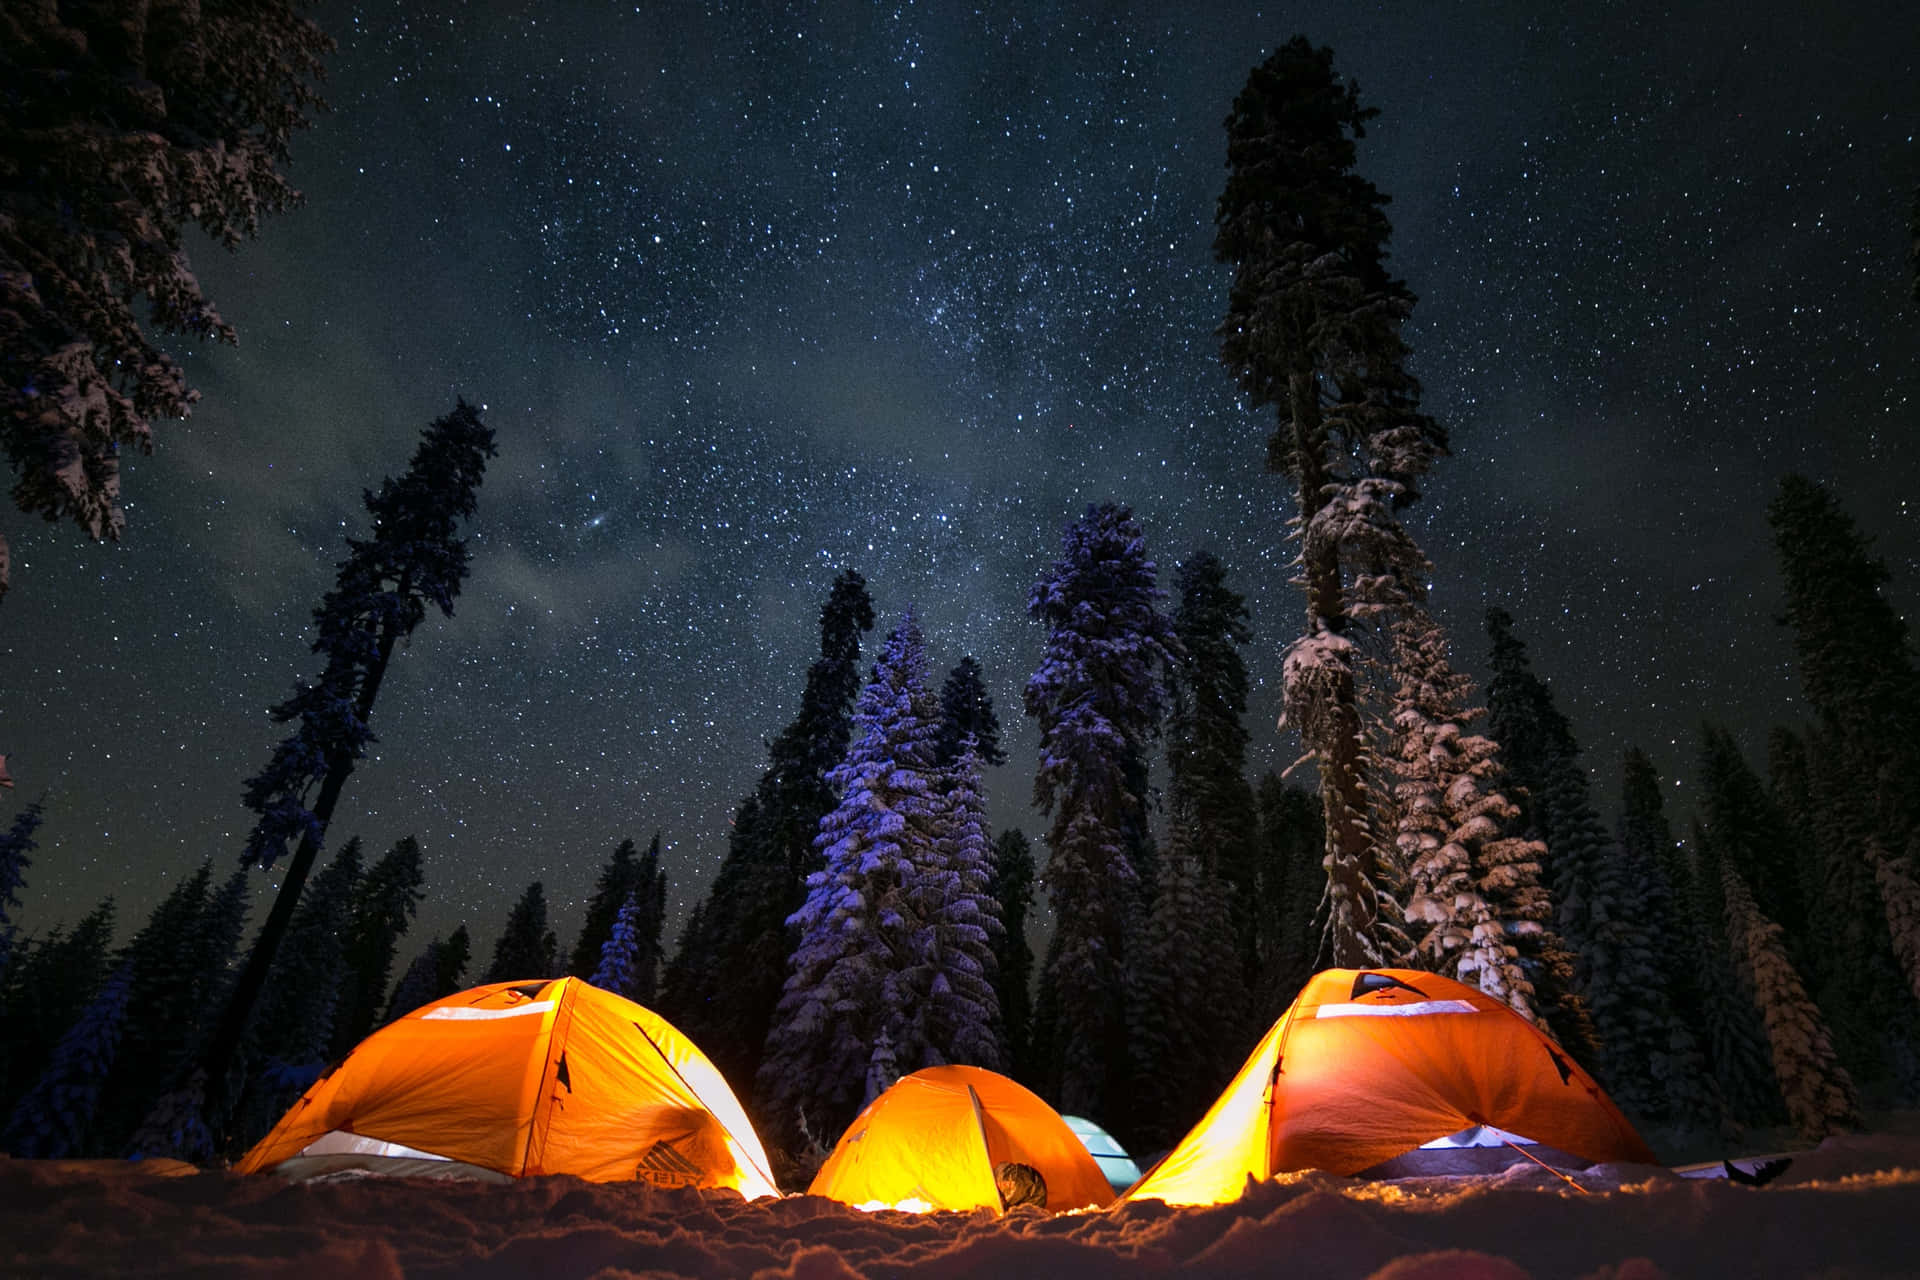 Camping Under the Stunning Starlit Sky